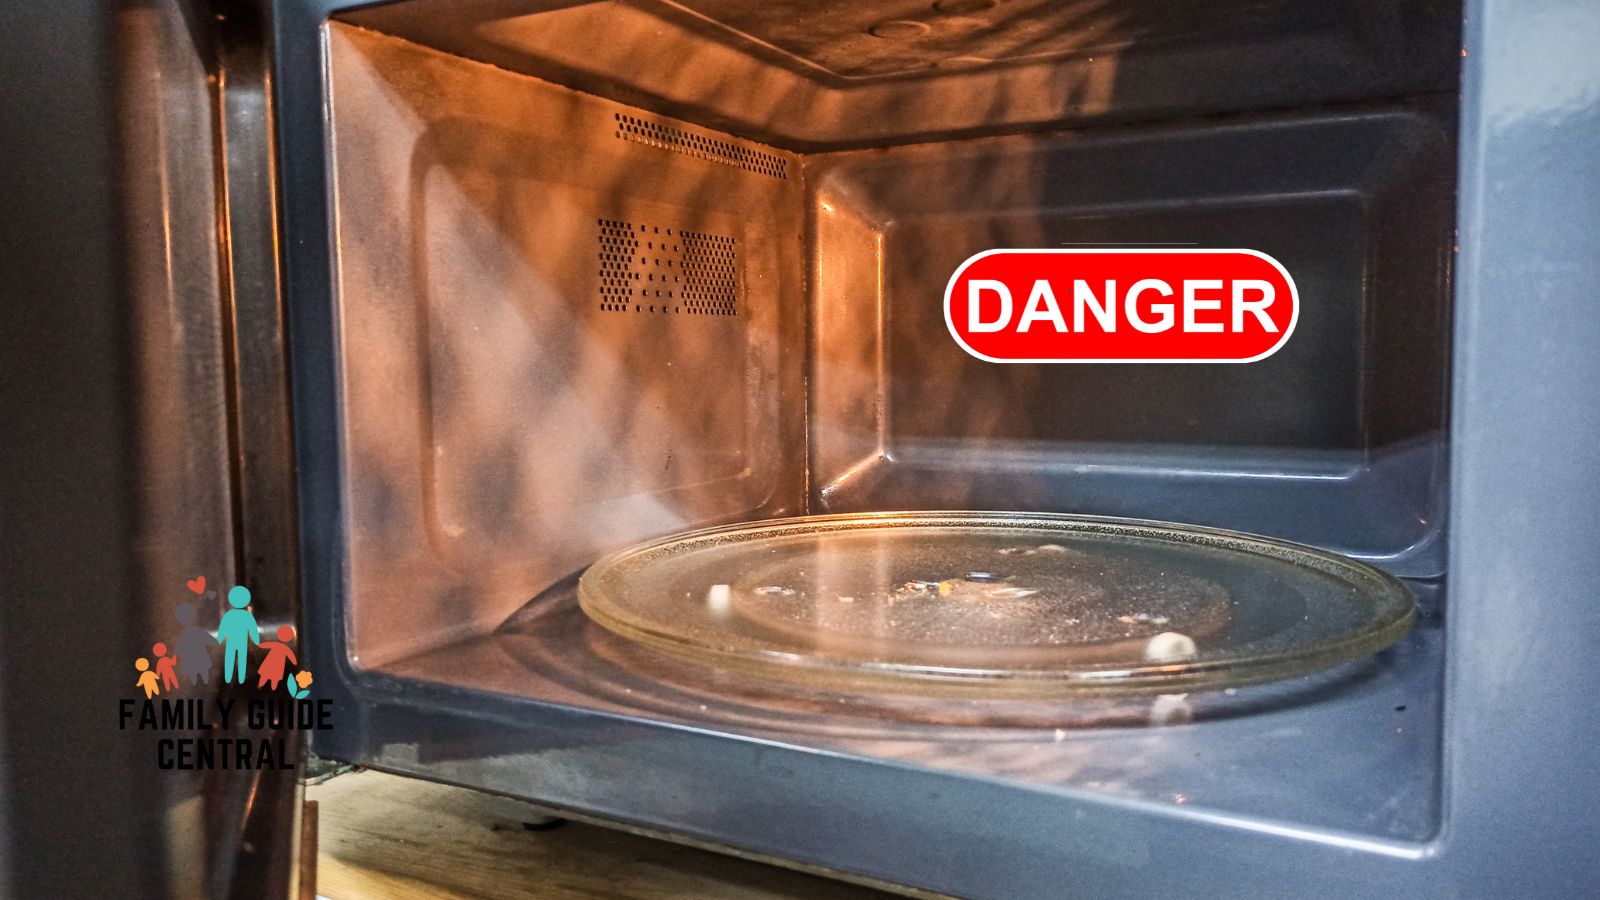 Dangers of a microwave - familyguidecentral.com